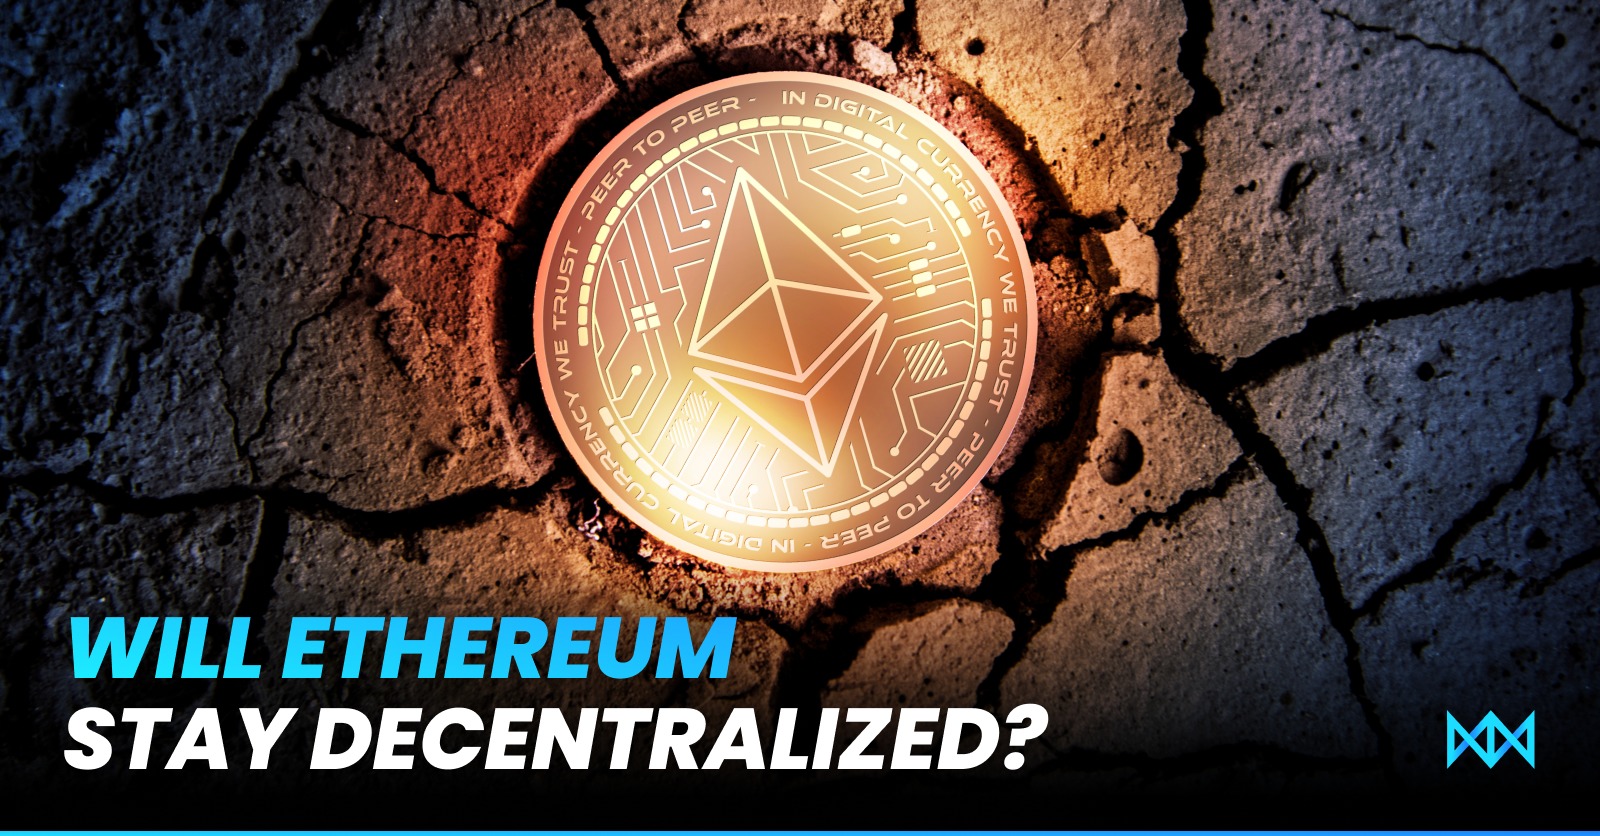 JP Morgan Might Take Away the Decentralization of Ethereum